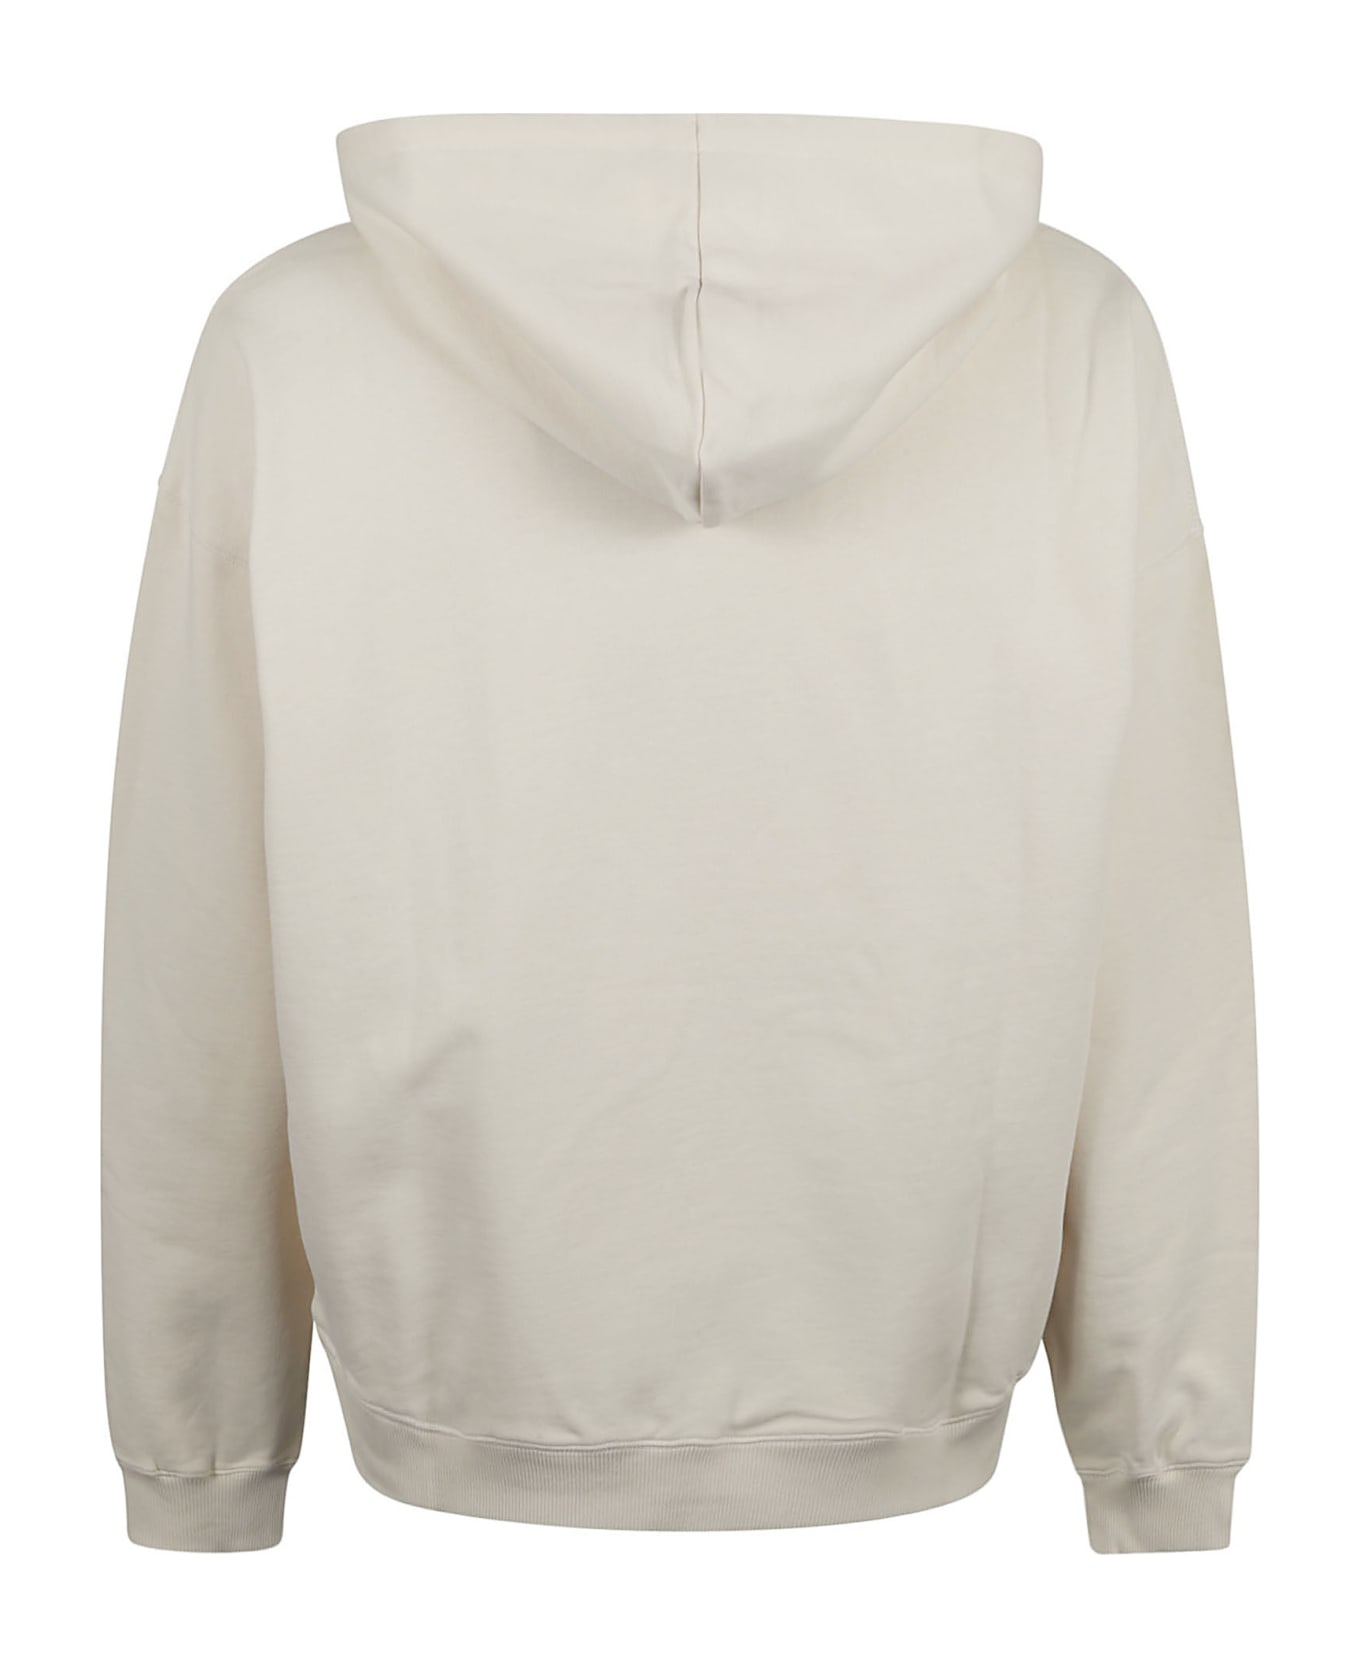 Axel Arigato Embroidered Hoodie - Pale Beige